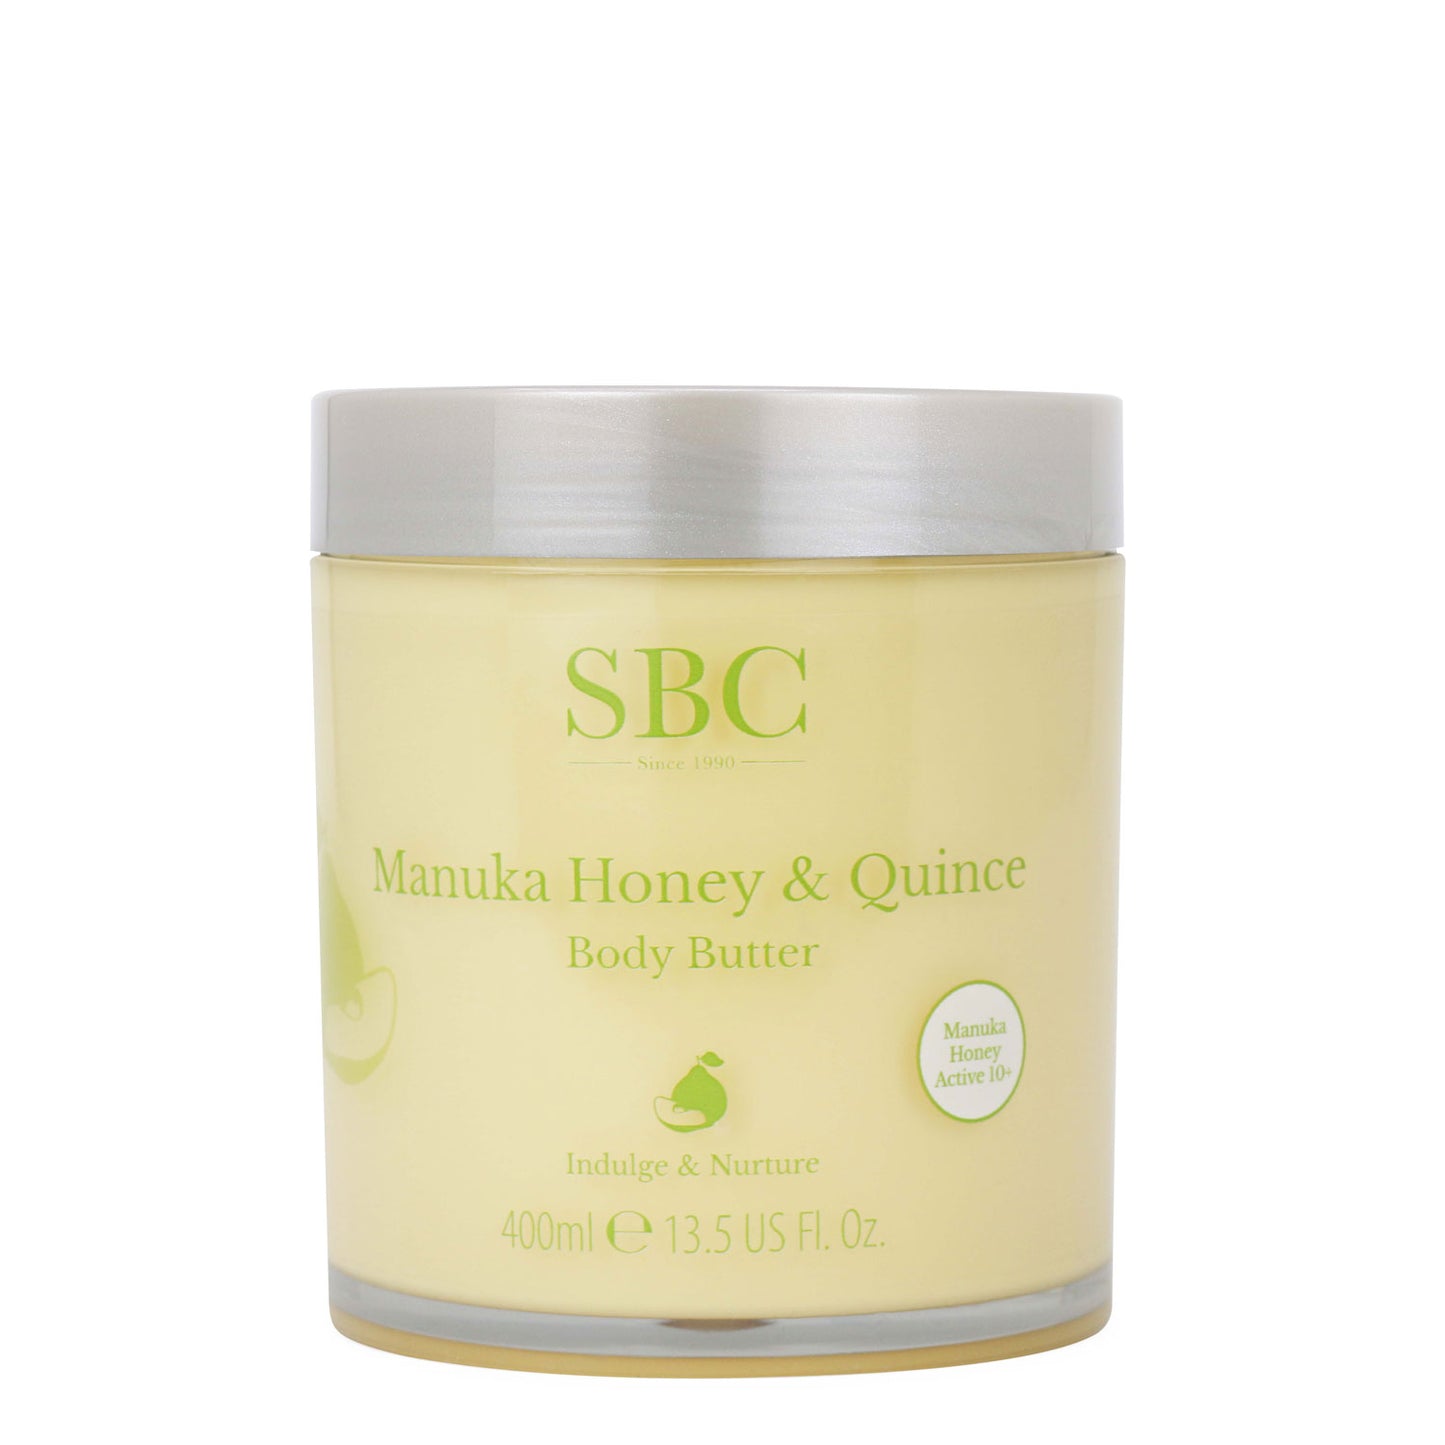 400ml Manuka Honey & Quince Body Butter on a white background